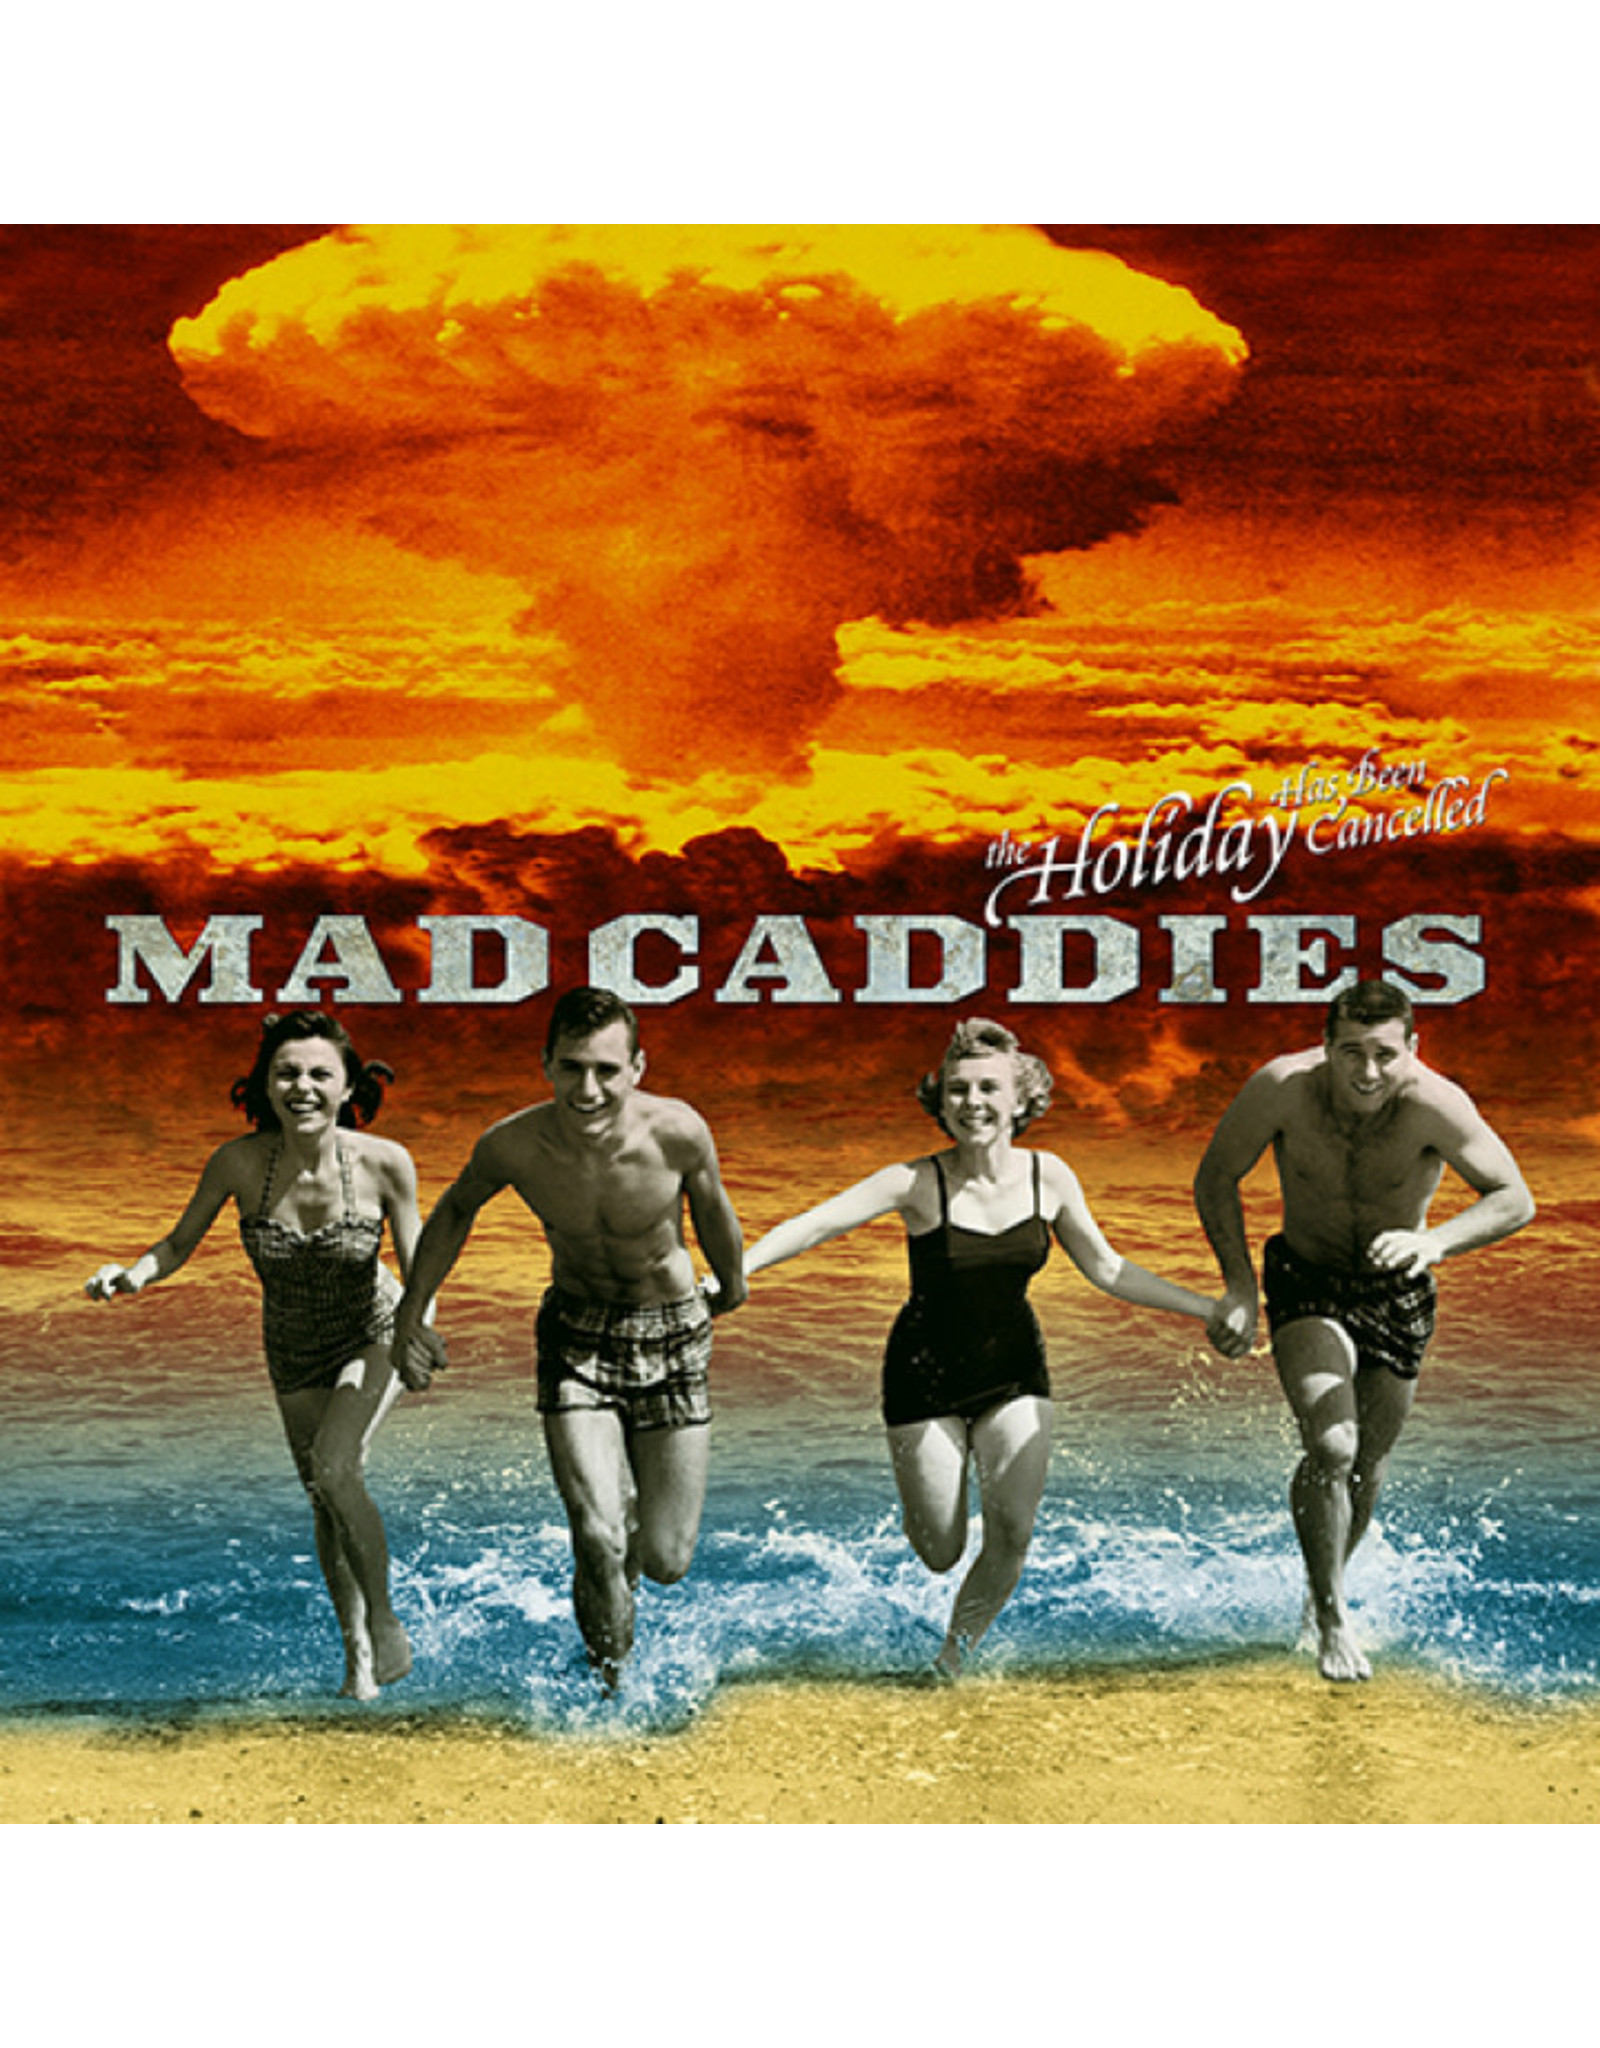 Mad Caddies - The Holiday Has Been Cancelled 10" LP